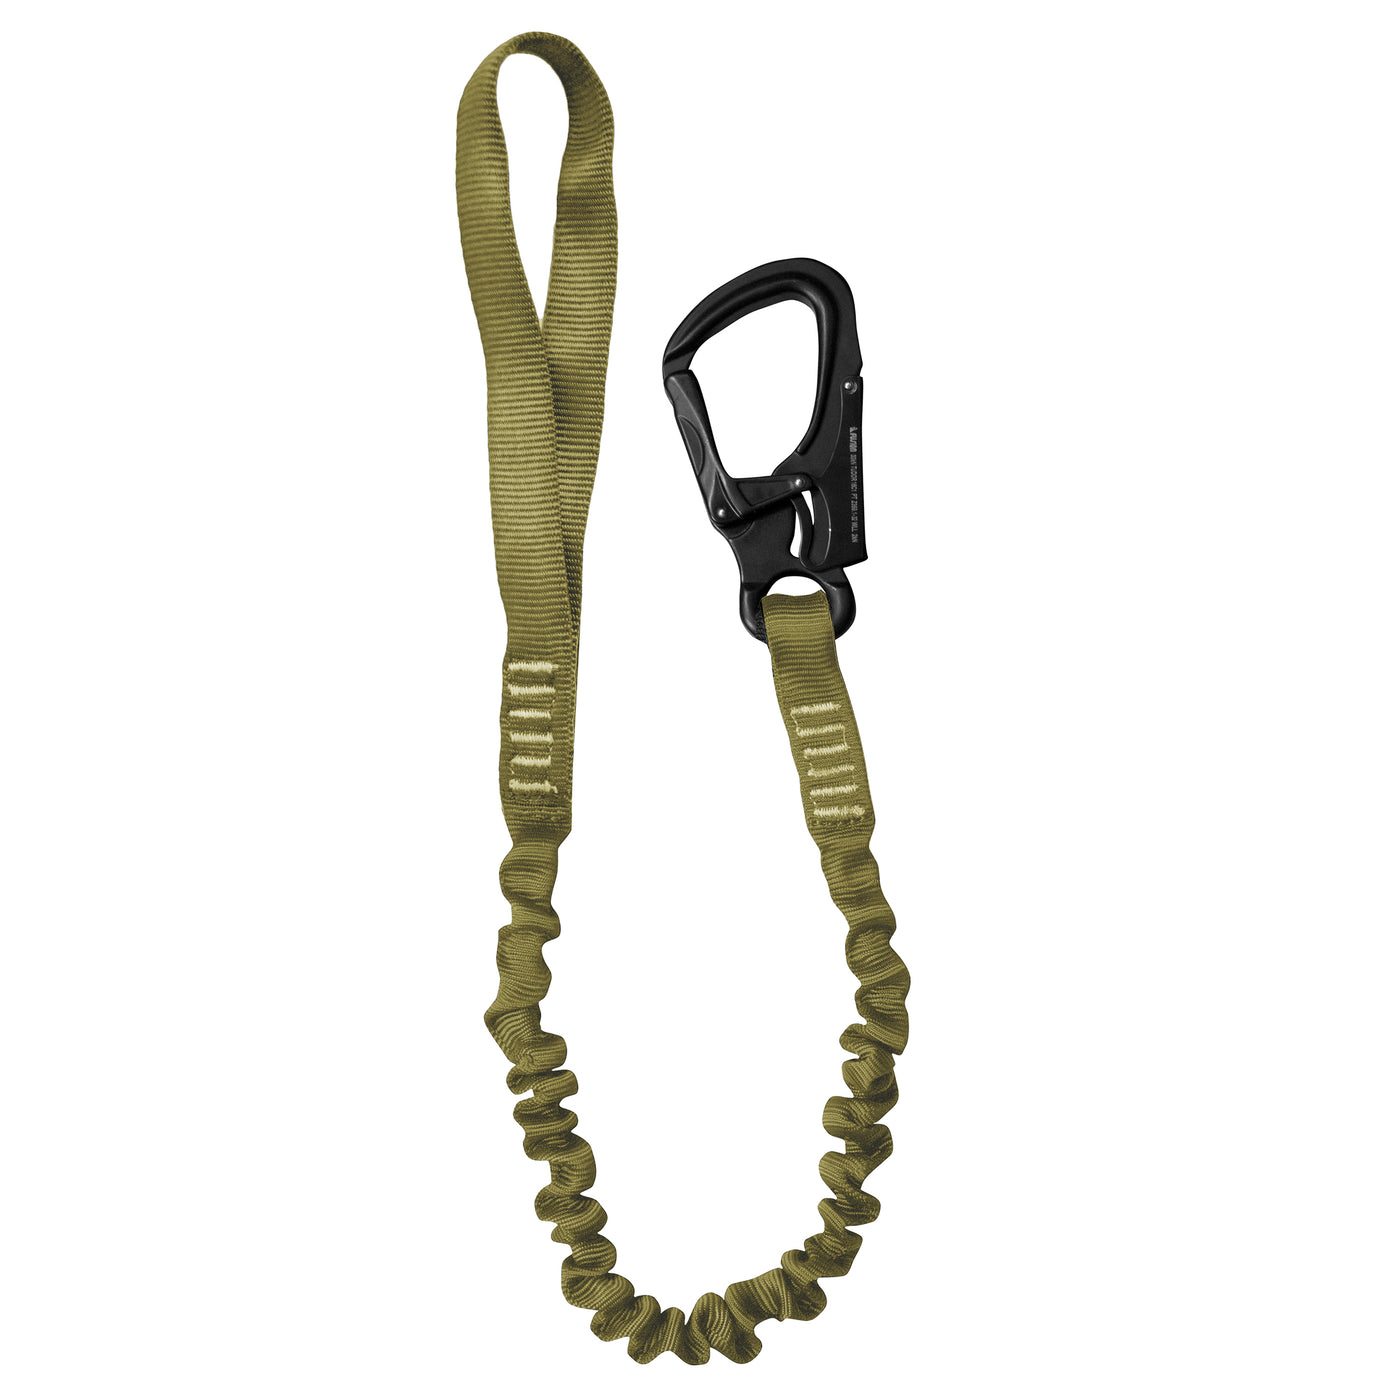 Helo Retention Lanyard CYB with Snap Hook & Hitched Loop